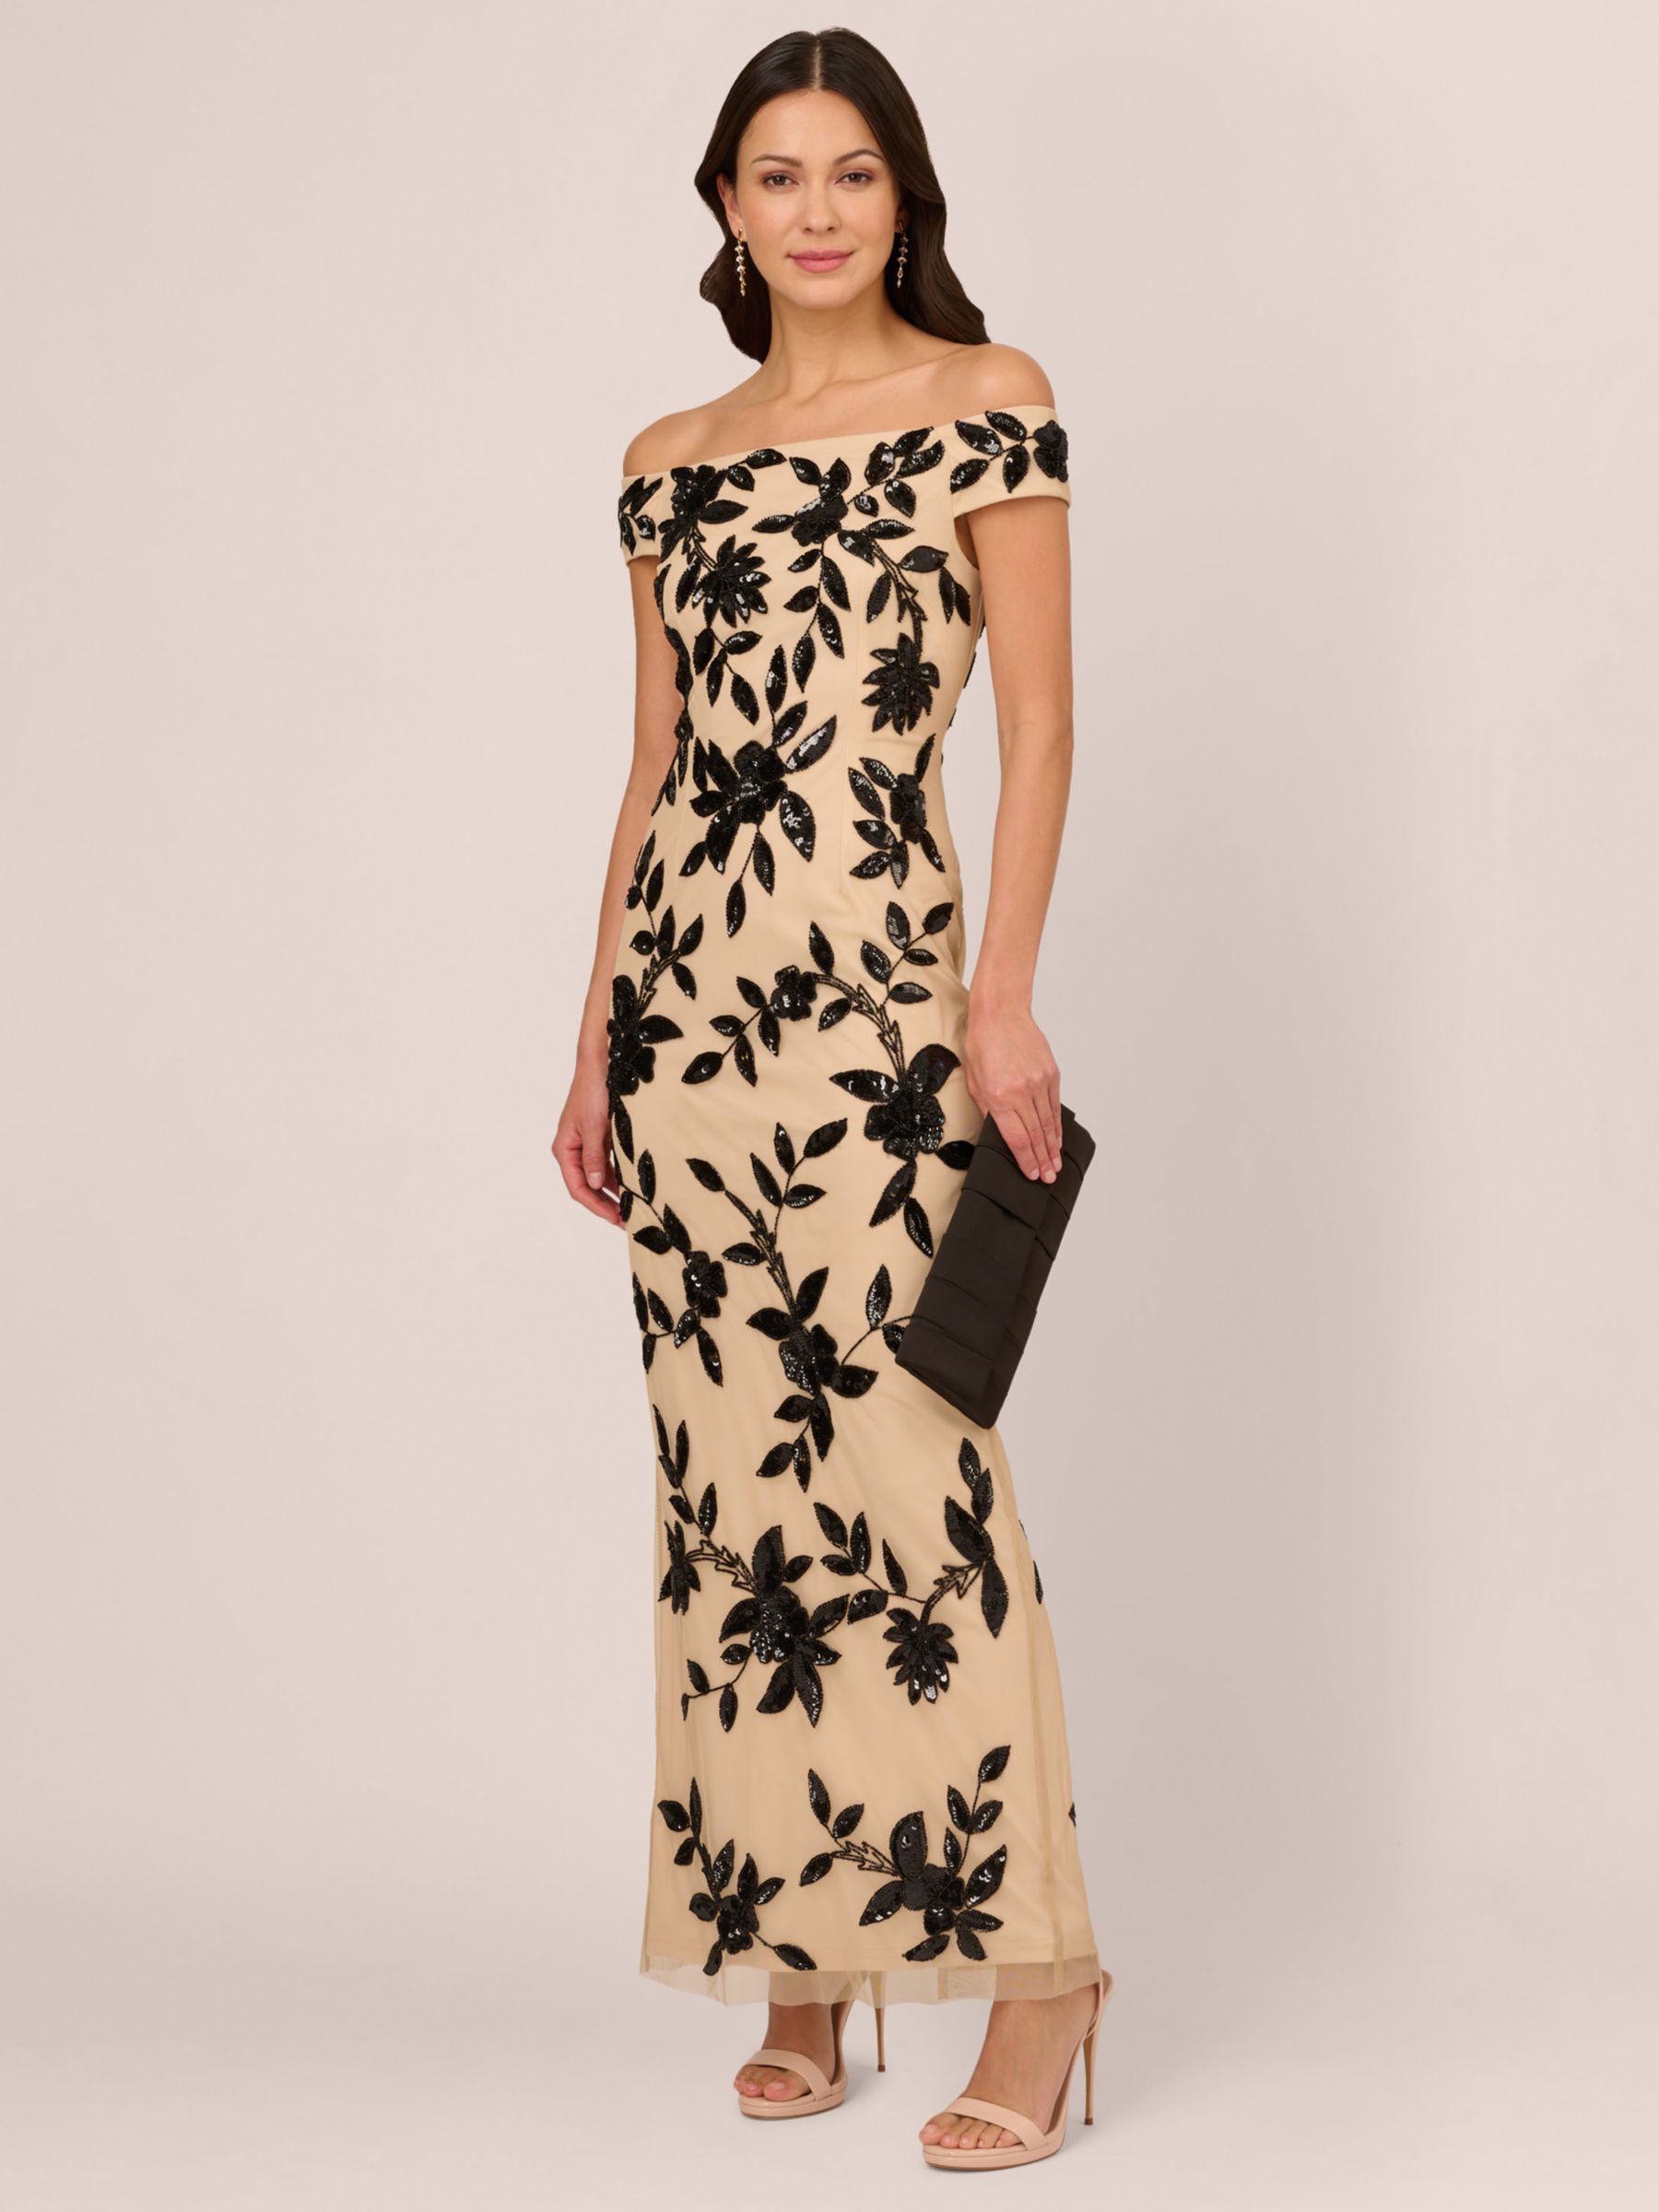 Buy Adrianna Papell Beaded Mesh Maxi Dress, Black/Nude Online at johnlewis.com